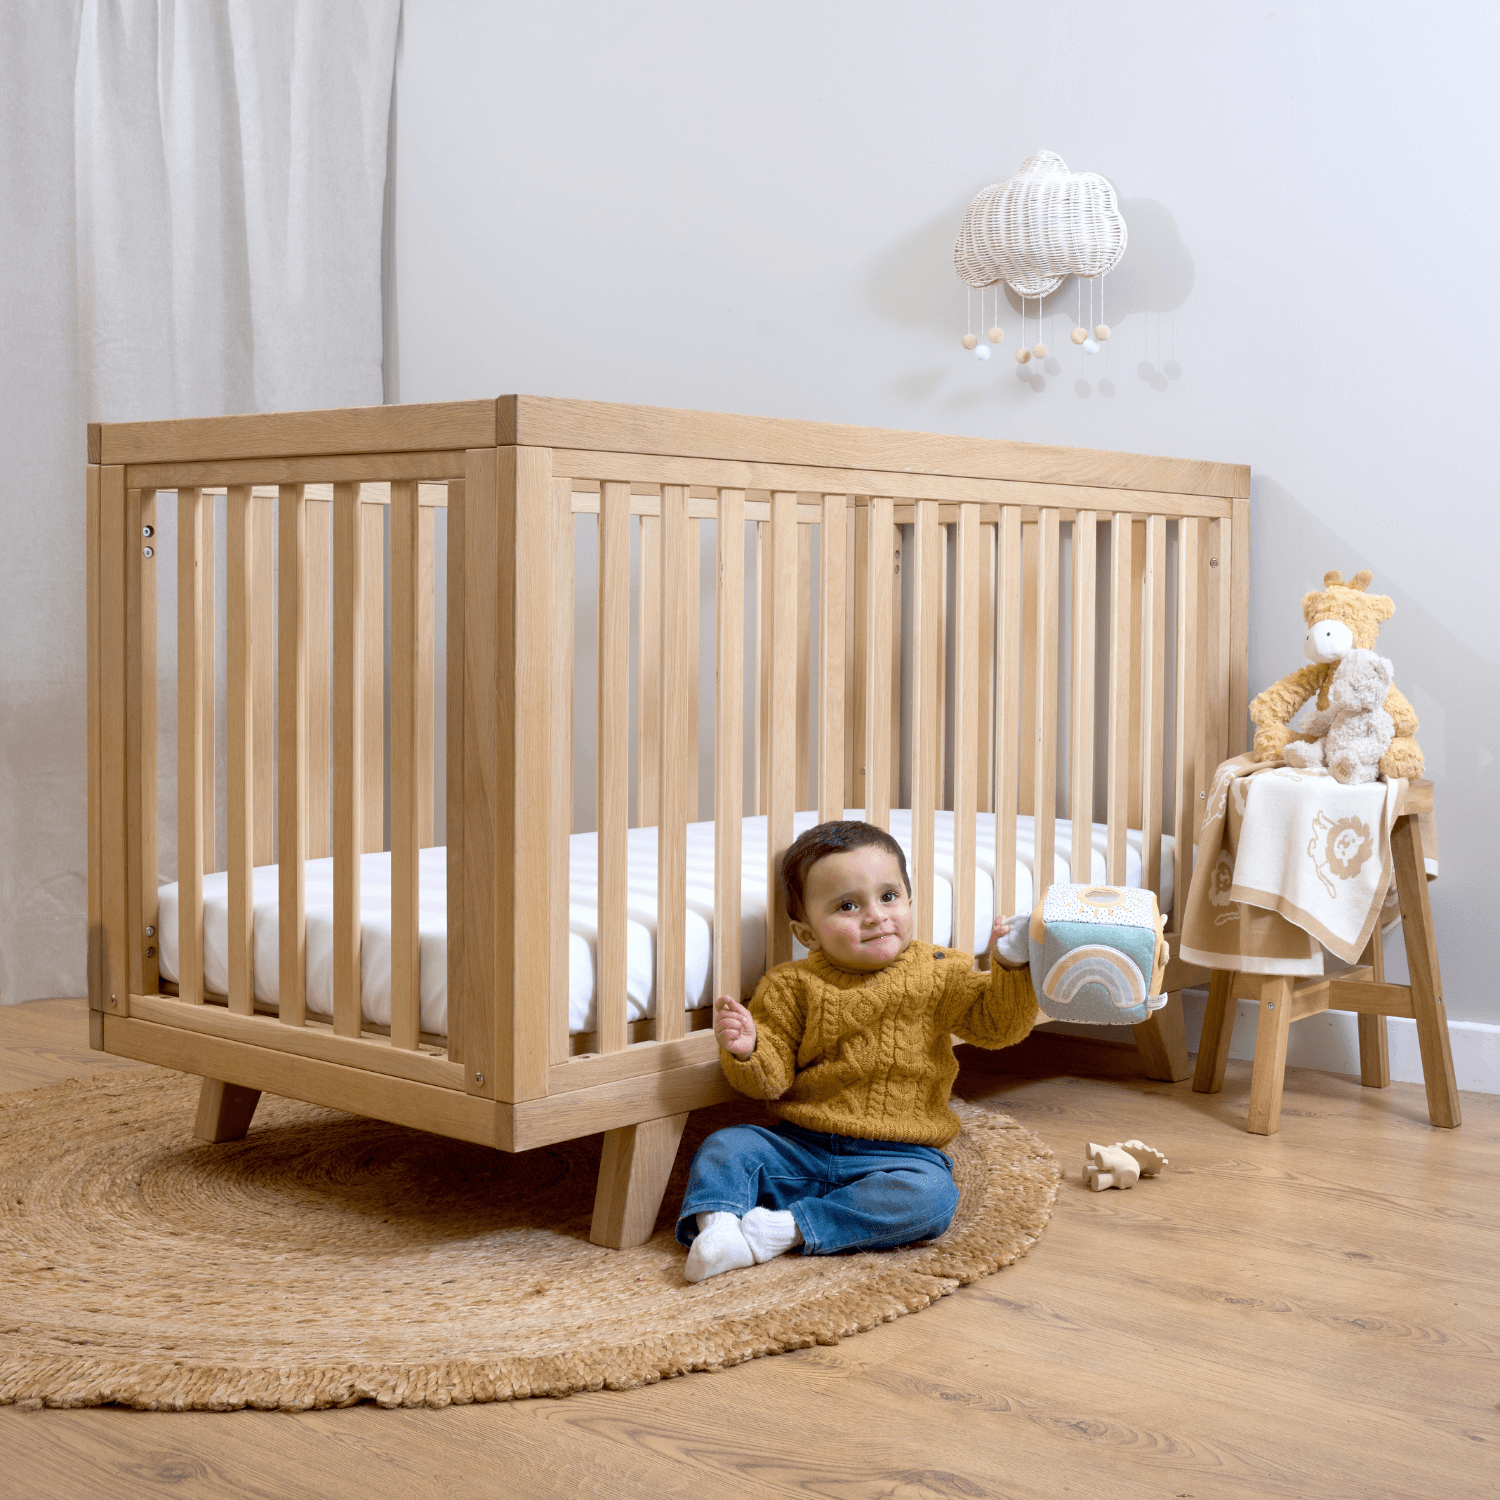 Toddler playing next to the Oak Cot Bed in a beautiful neutral nursery | Nursery Furniture - Clair de Lune UK